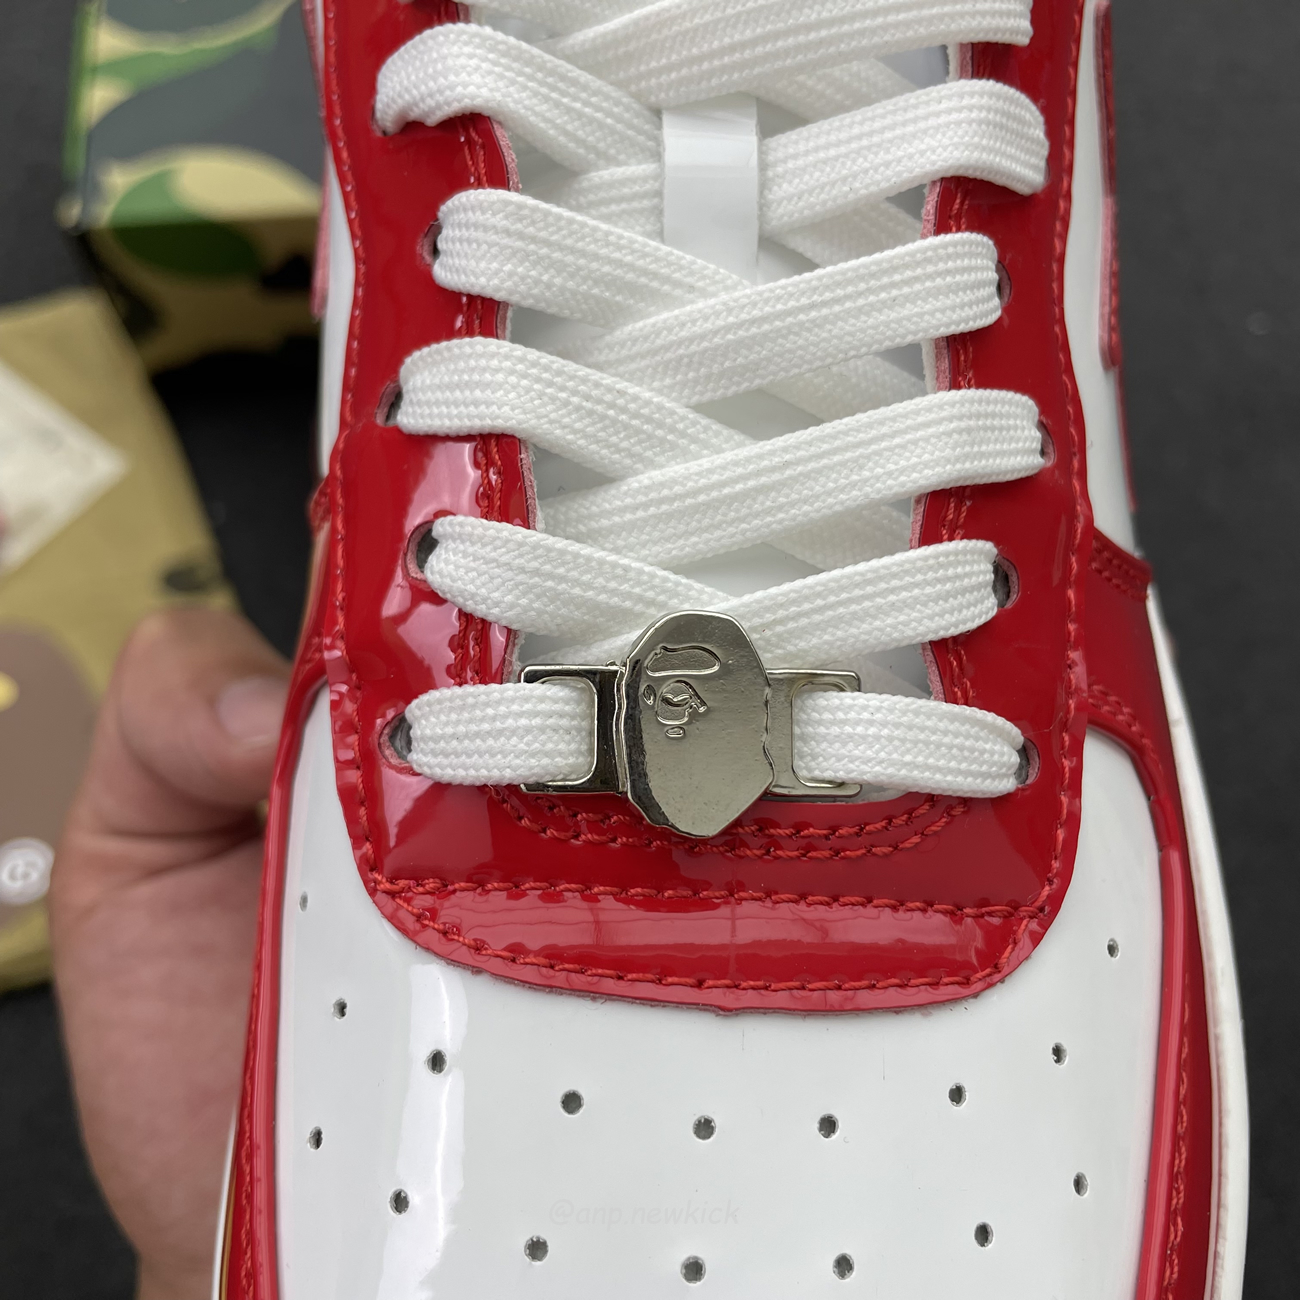 A Bathing Ape Bape Sta Patent Leather White Red 1i70 291 021 (8) - www.newkick.org